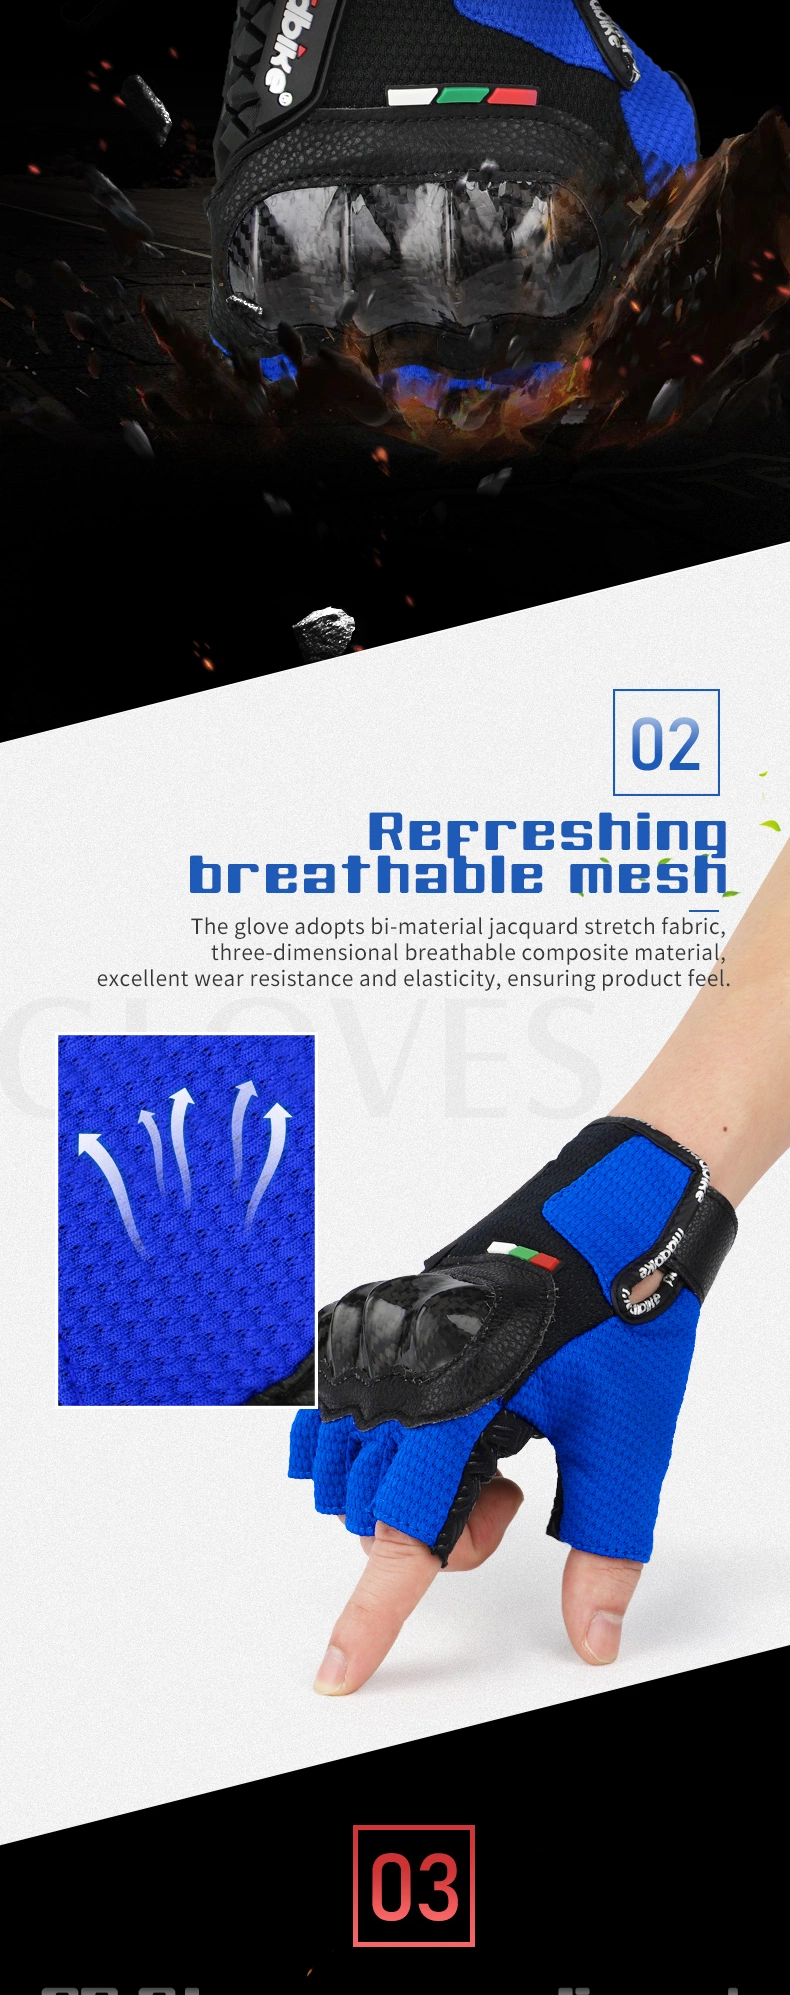 Hot Sale Motorcycle Riding Gloves Motocross Breathable Half Finger Motorcycle Hand Bicycle Gloves Racing Fingerless Gloves